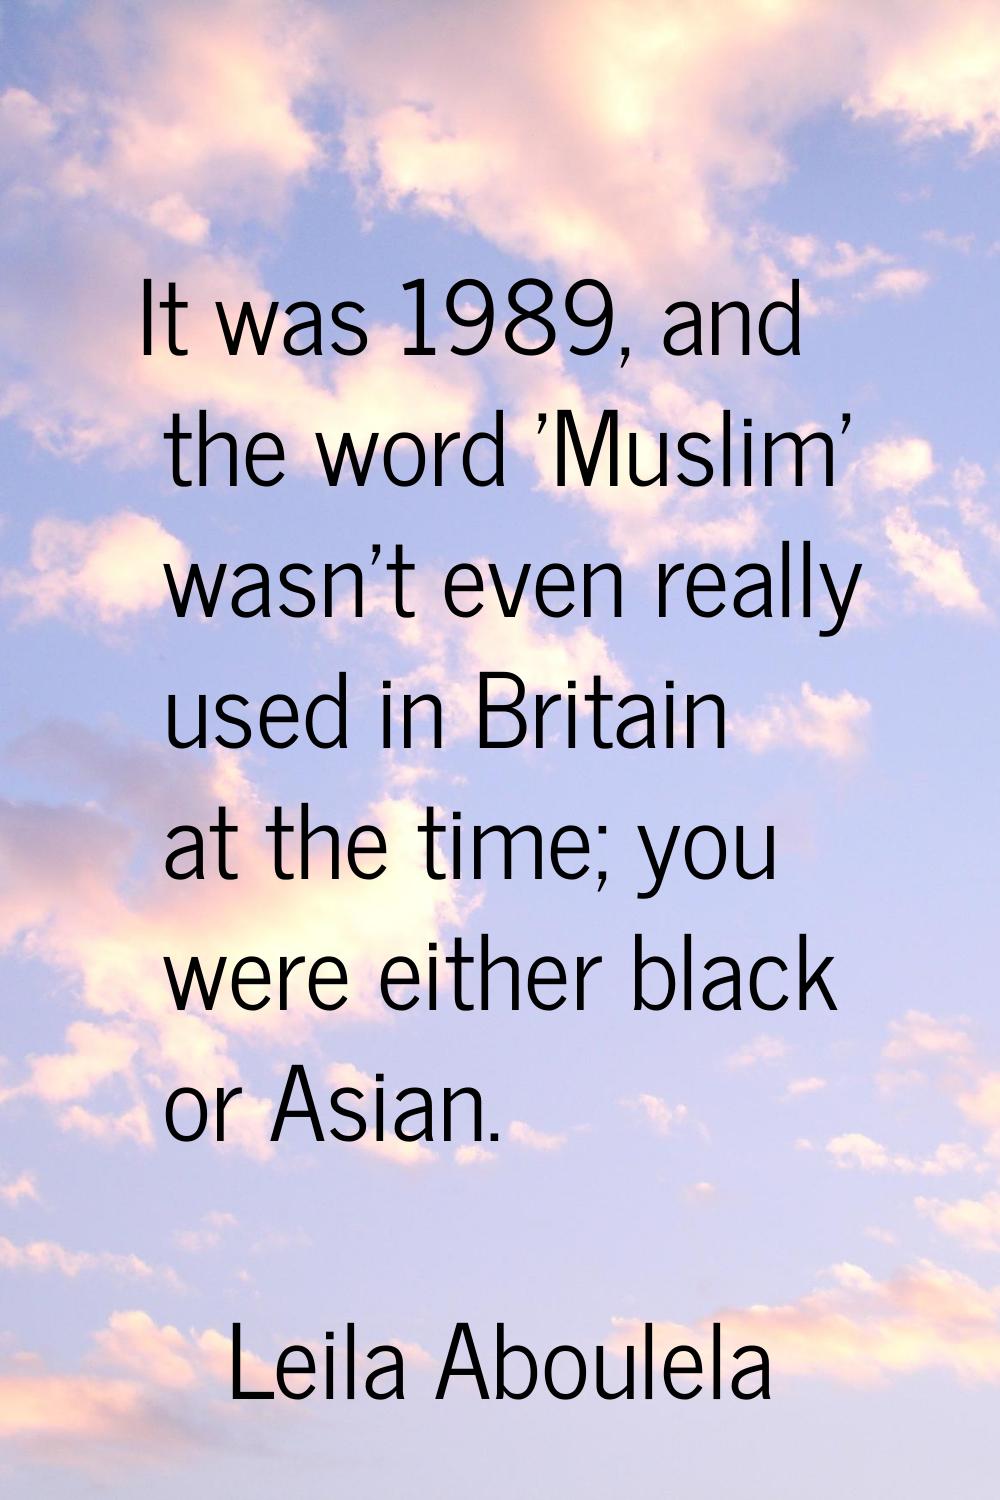 It was 1989, and the word 'Muslim' wasn't even really used in Britain at the time; you were either 